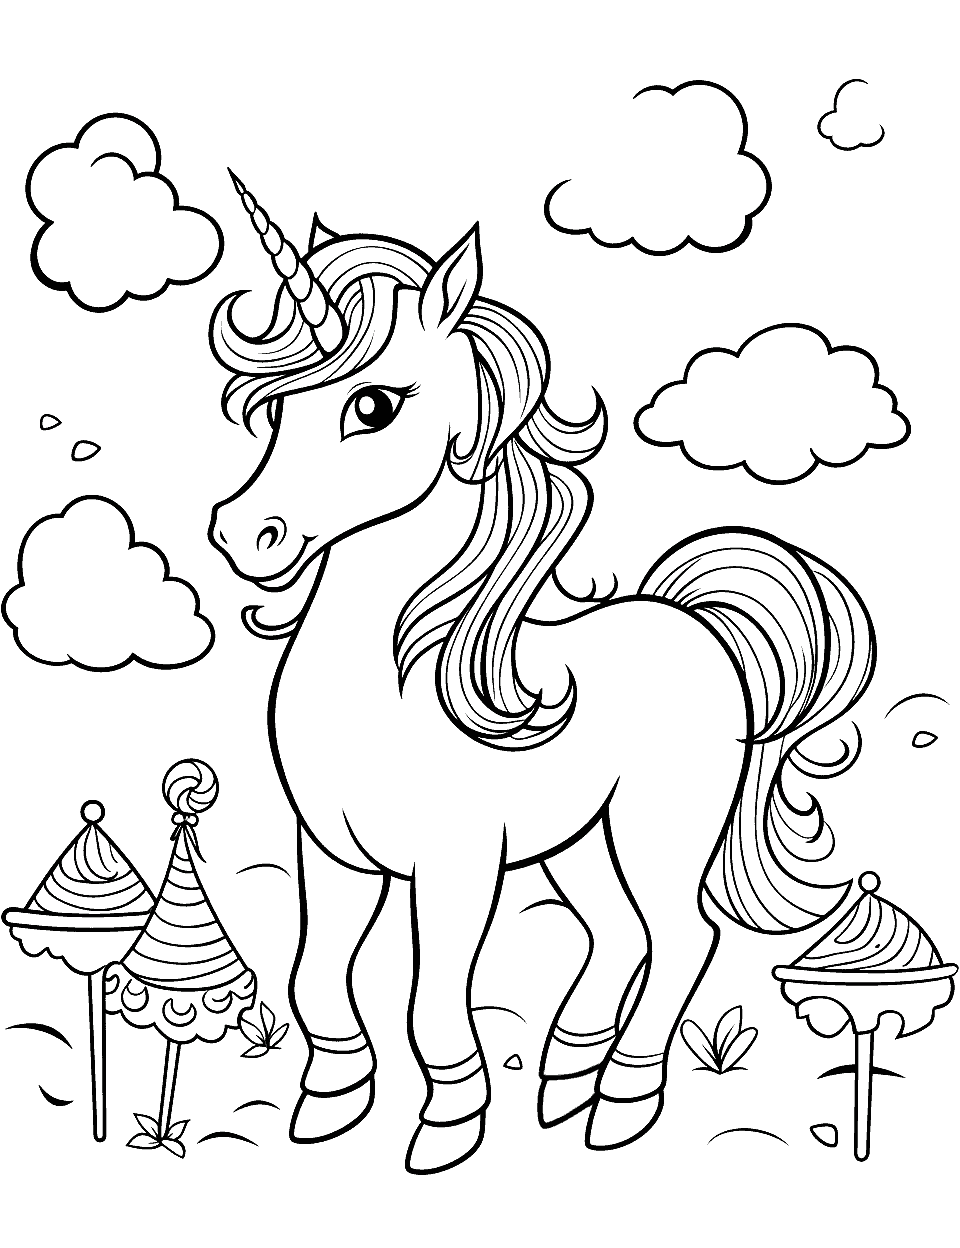 Unicorn In the Clouds Coloring Page - A smiling unicorn standing among the clouds.